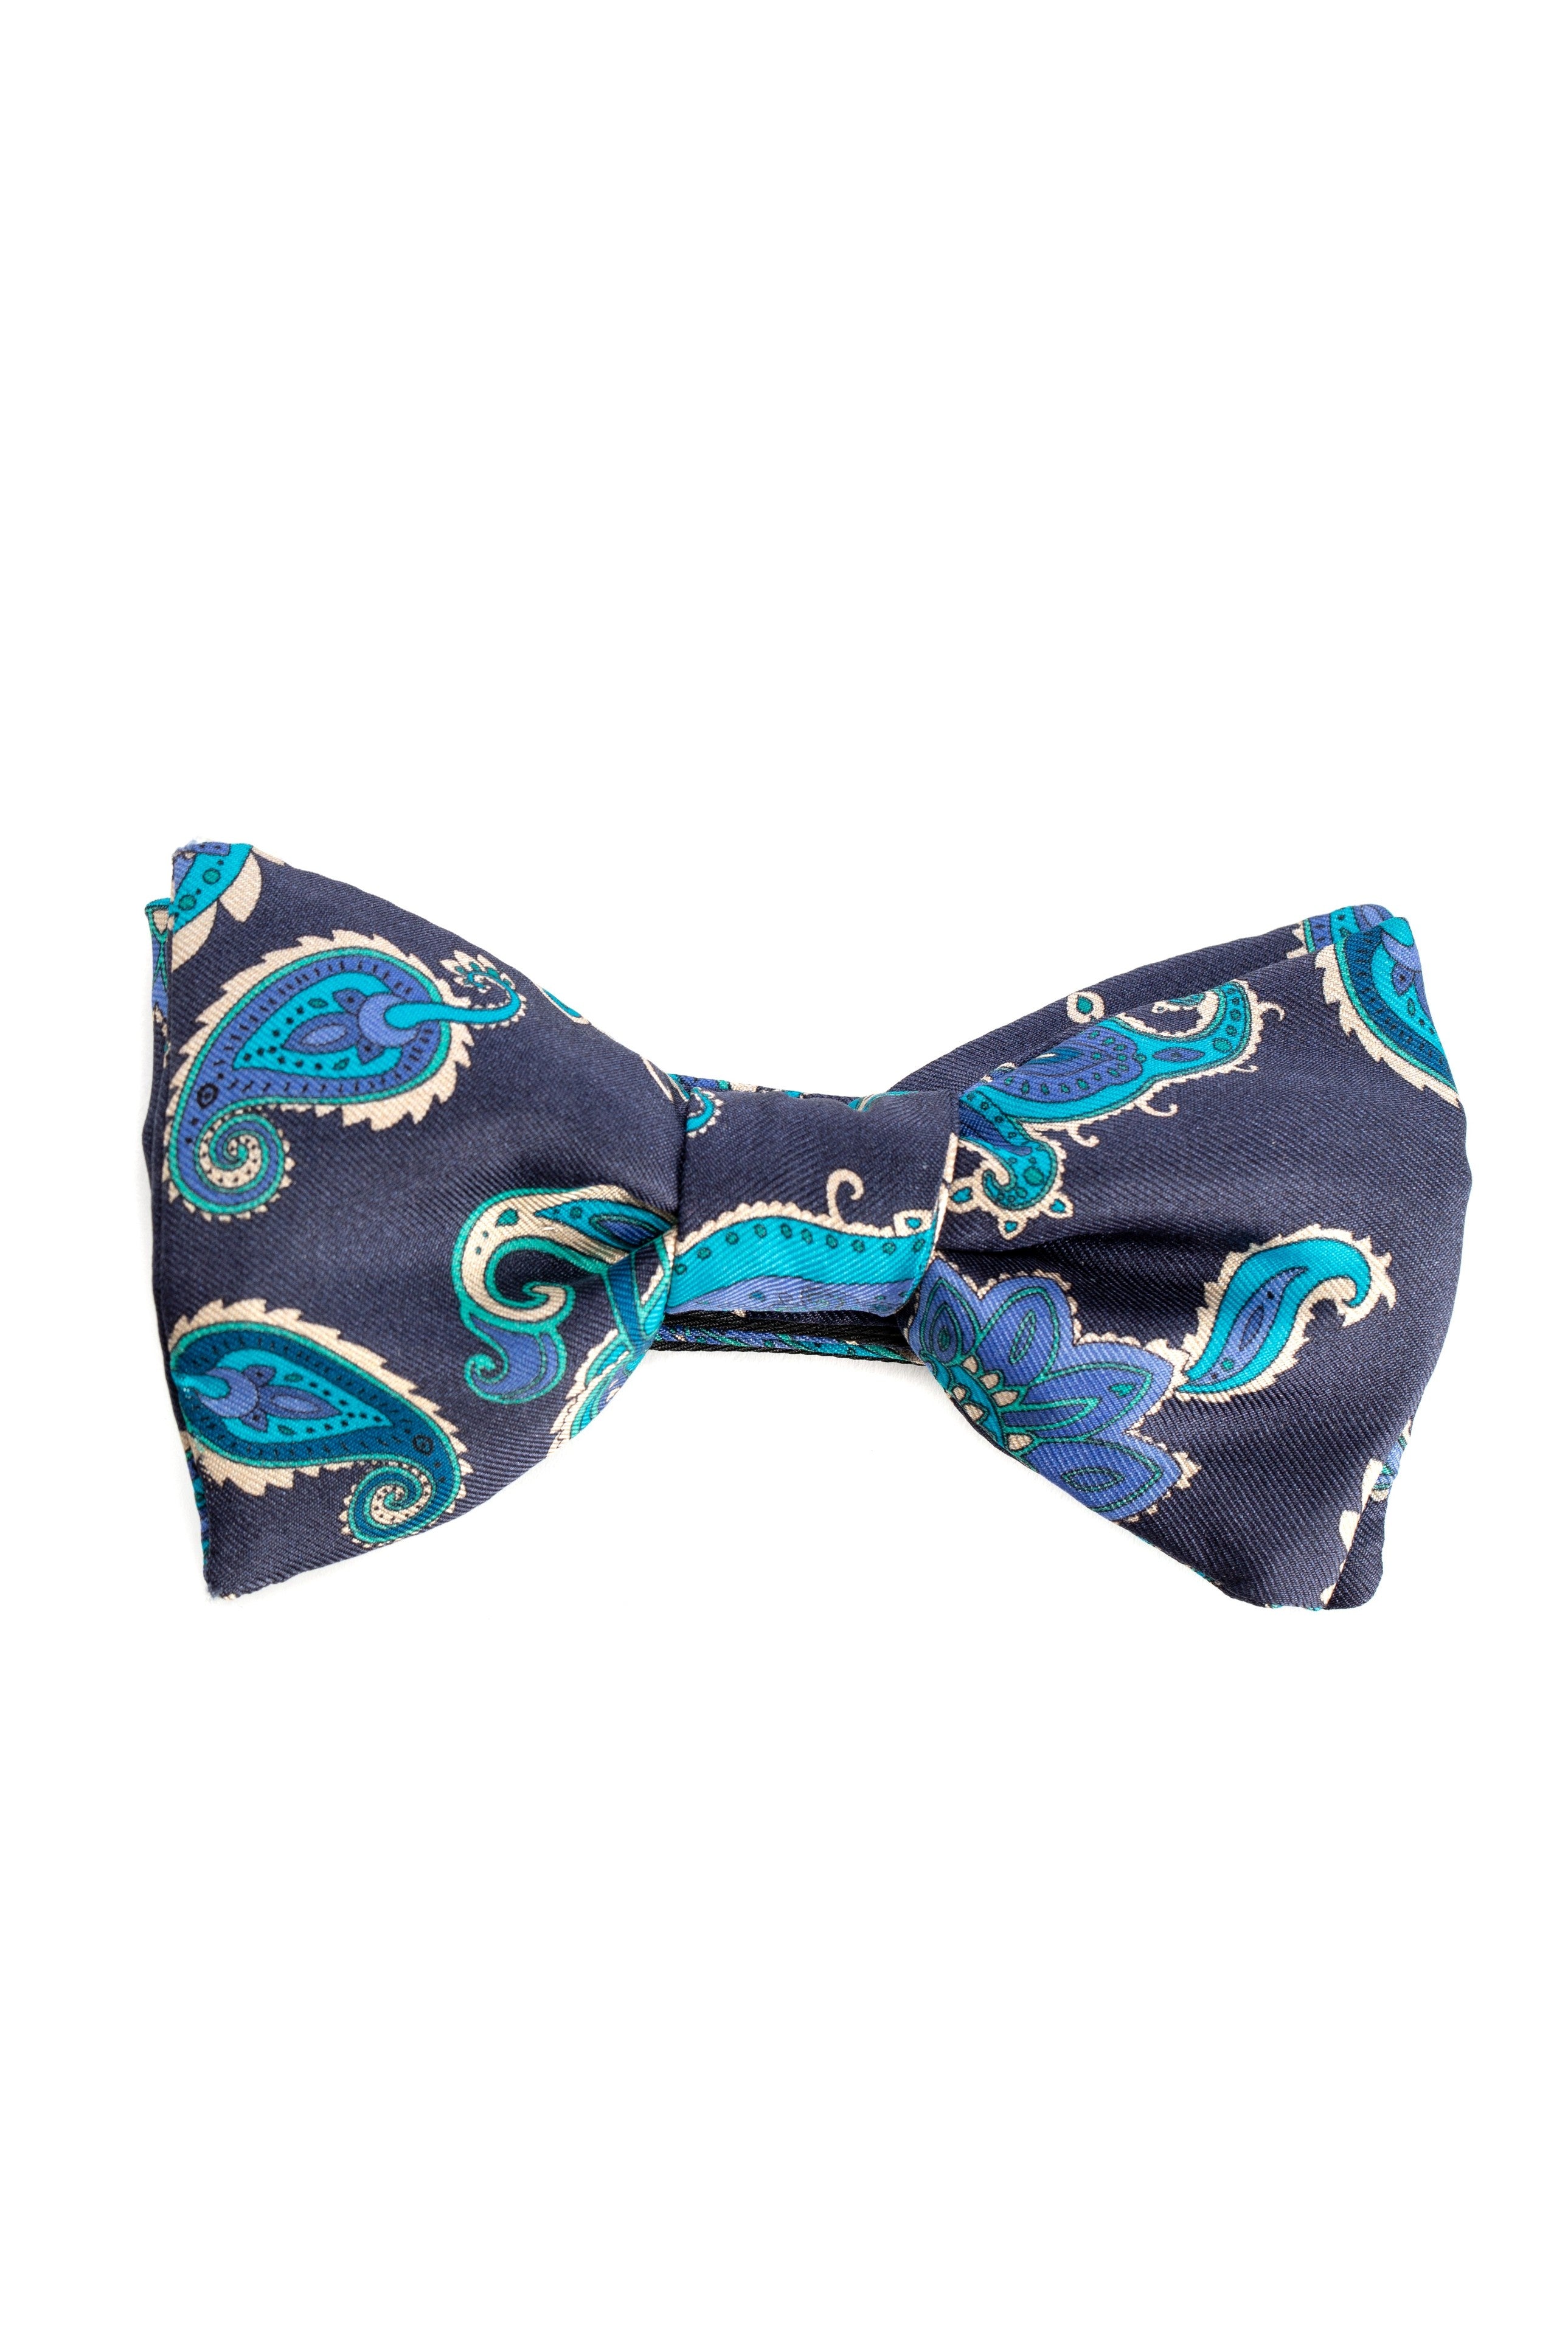 Navy Blue Paisley Pattern Bow Tie